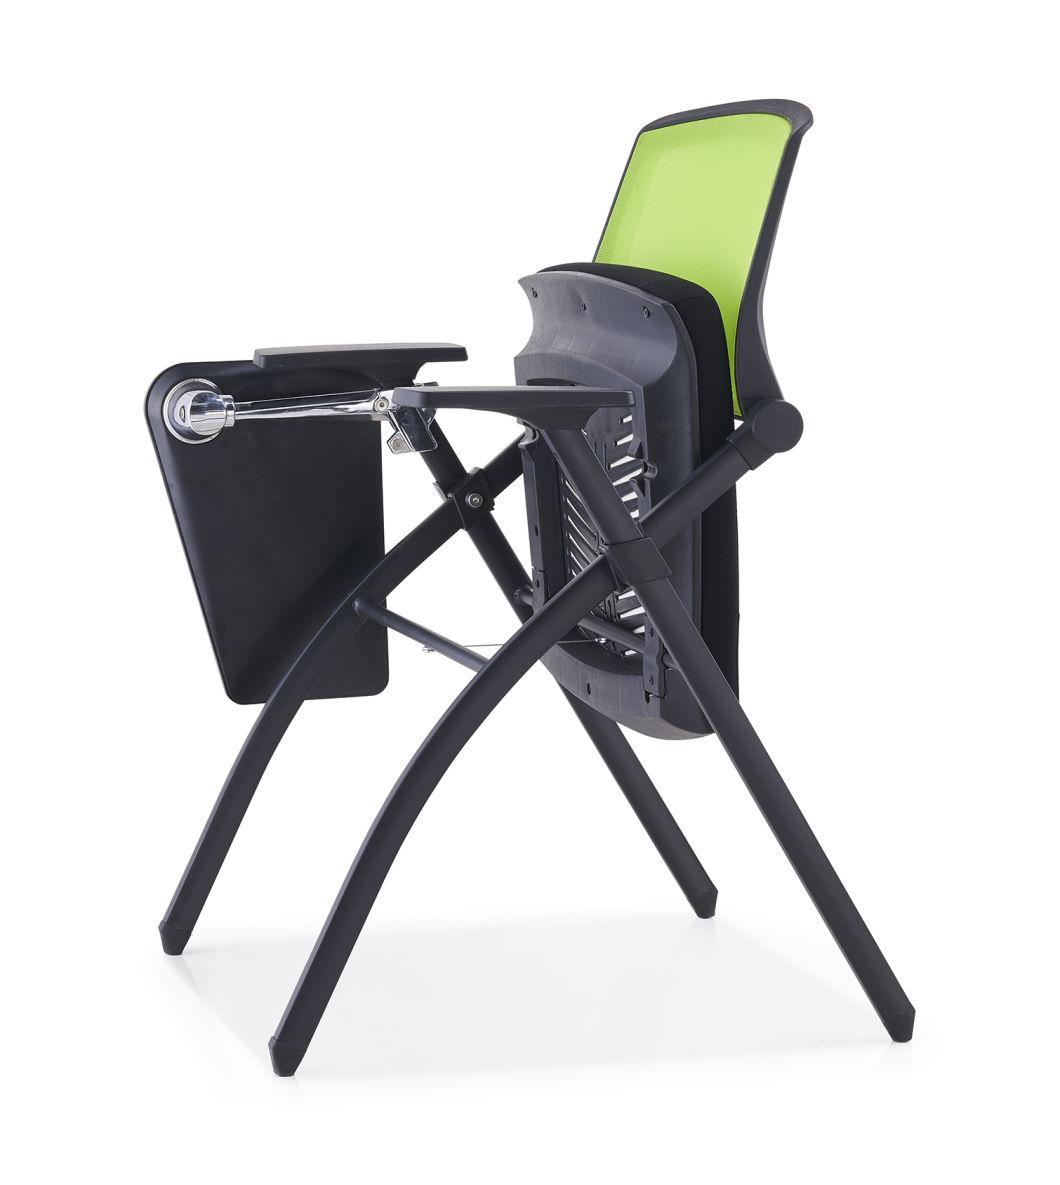 D191 Morden Foldable Office Chair with Writing Tablet